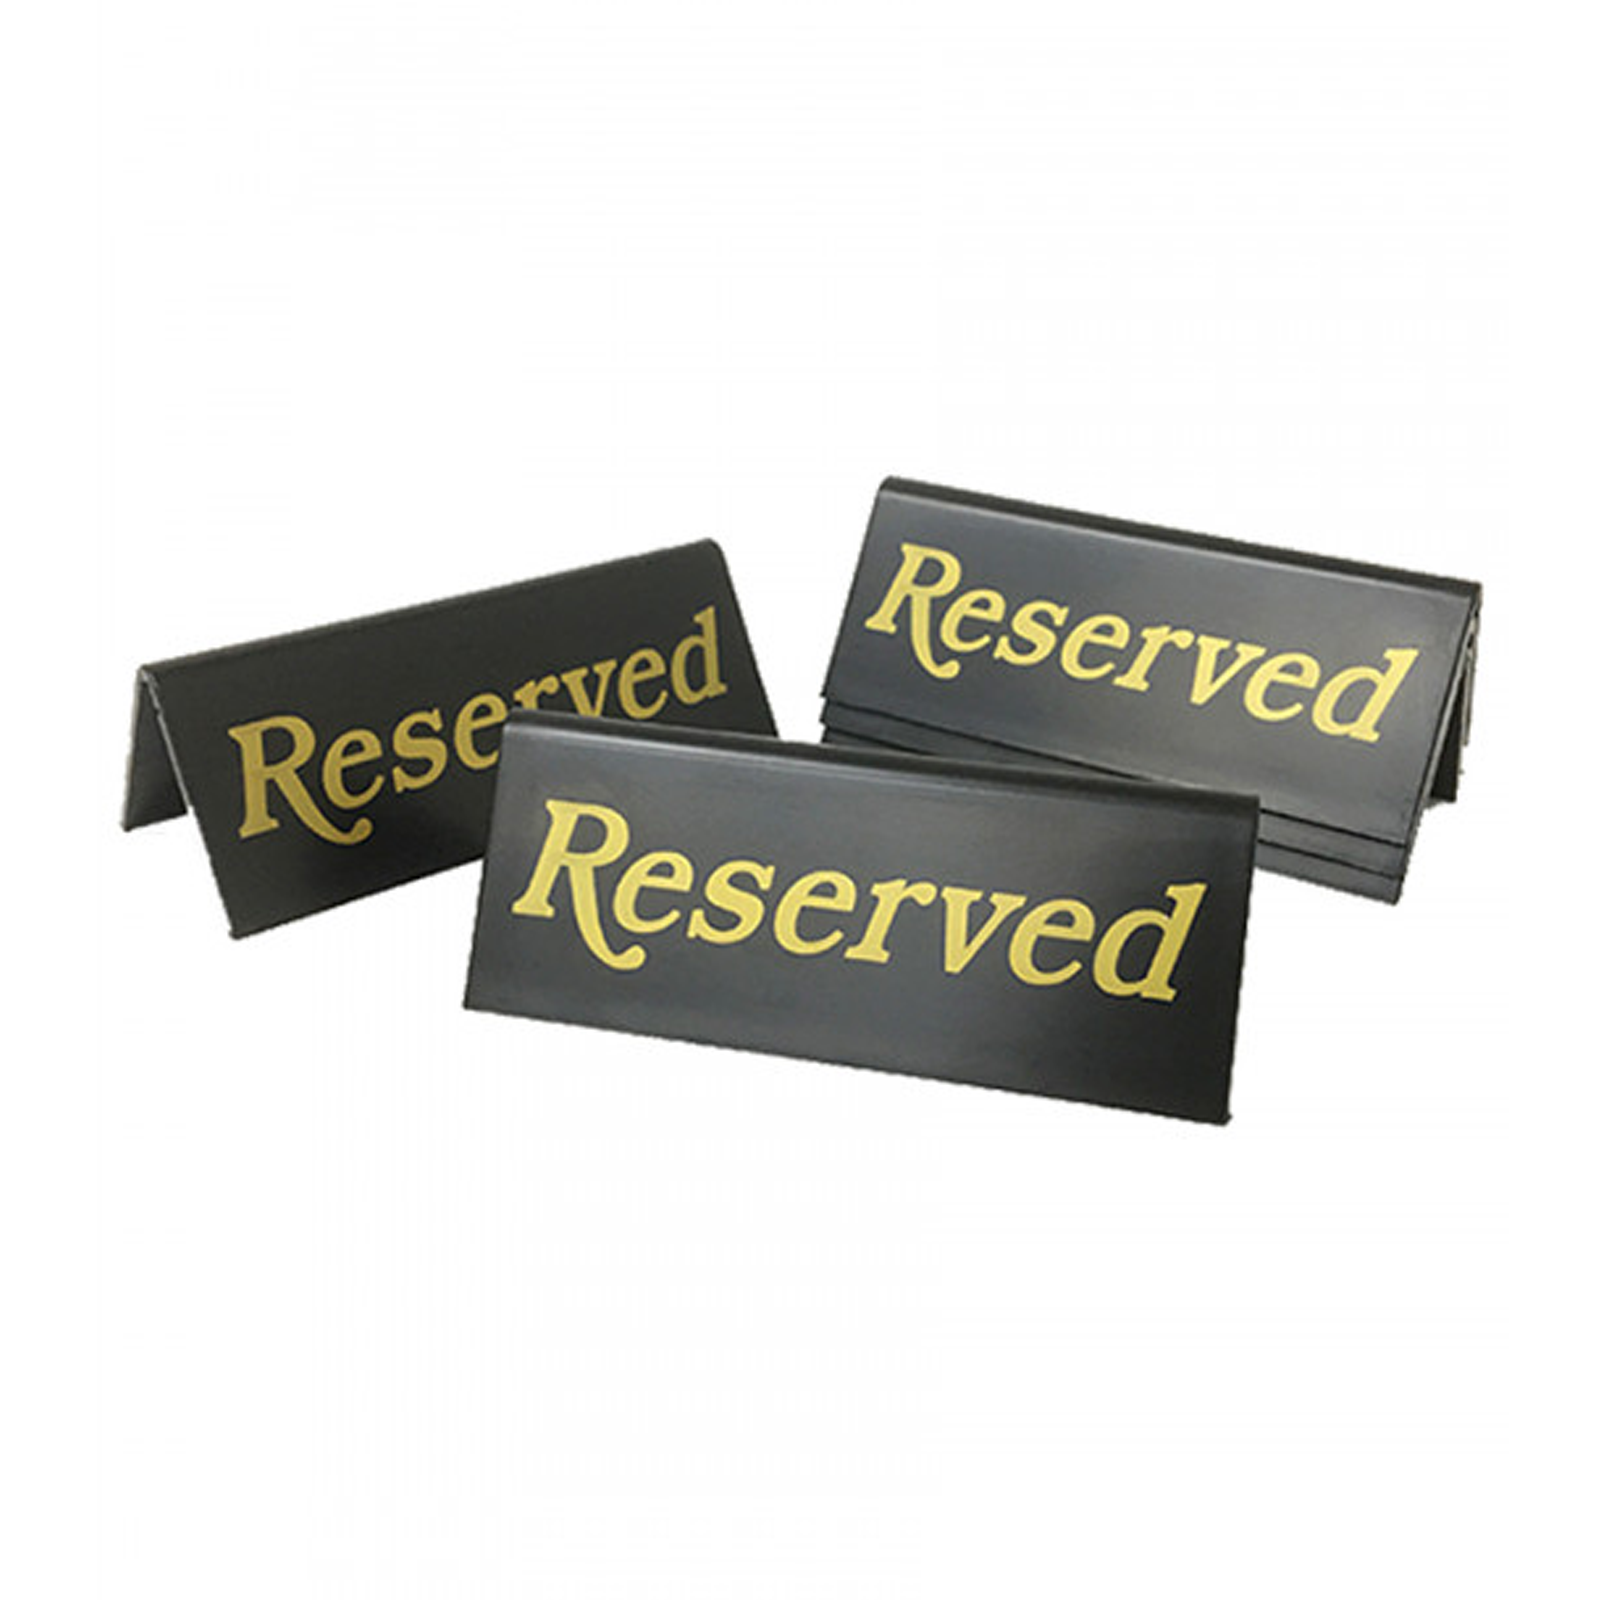 Reserved table tent notices. Pack of 5 (Gold / Black)